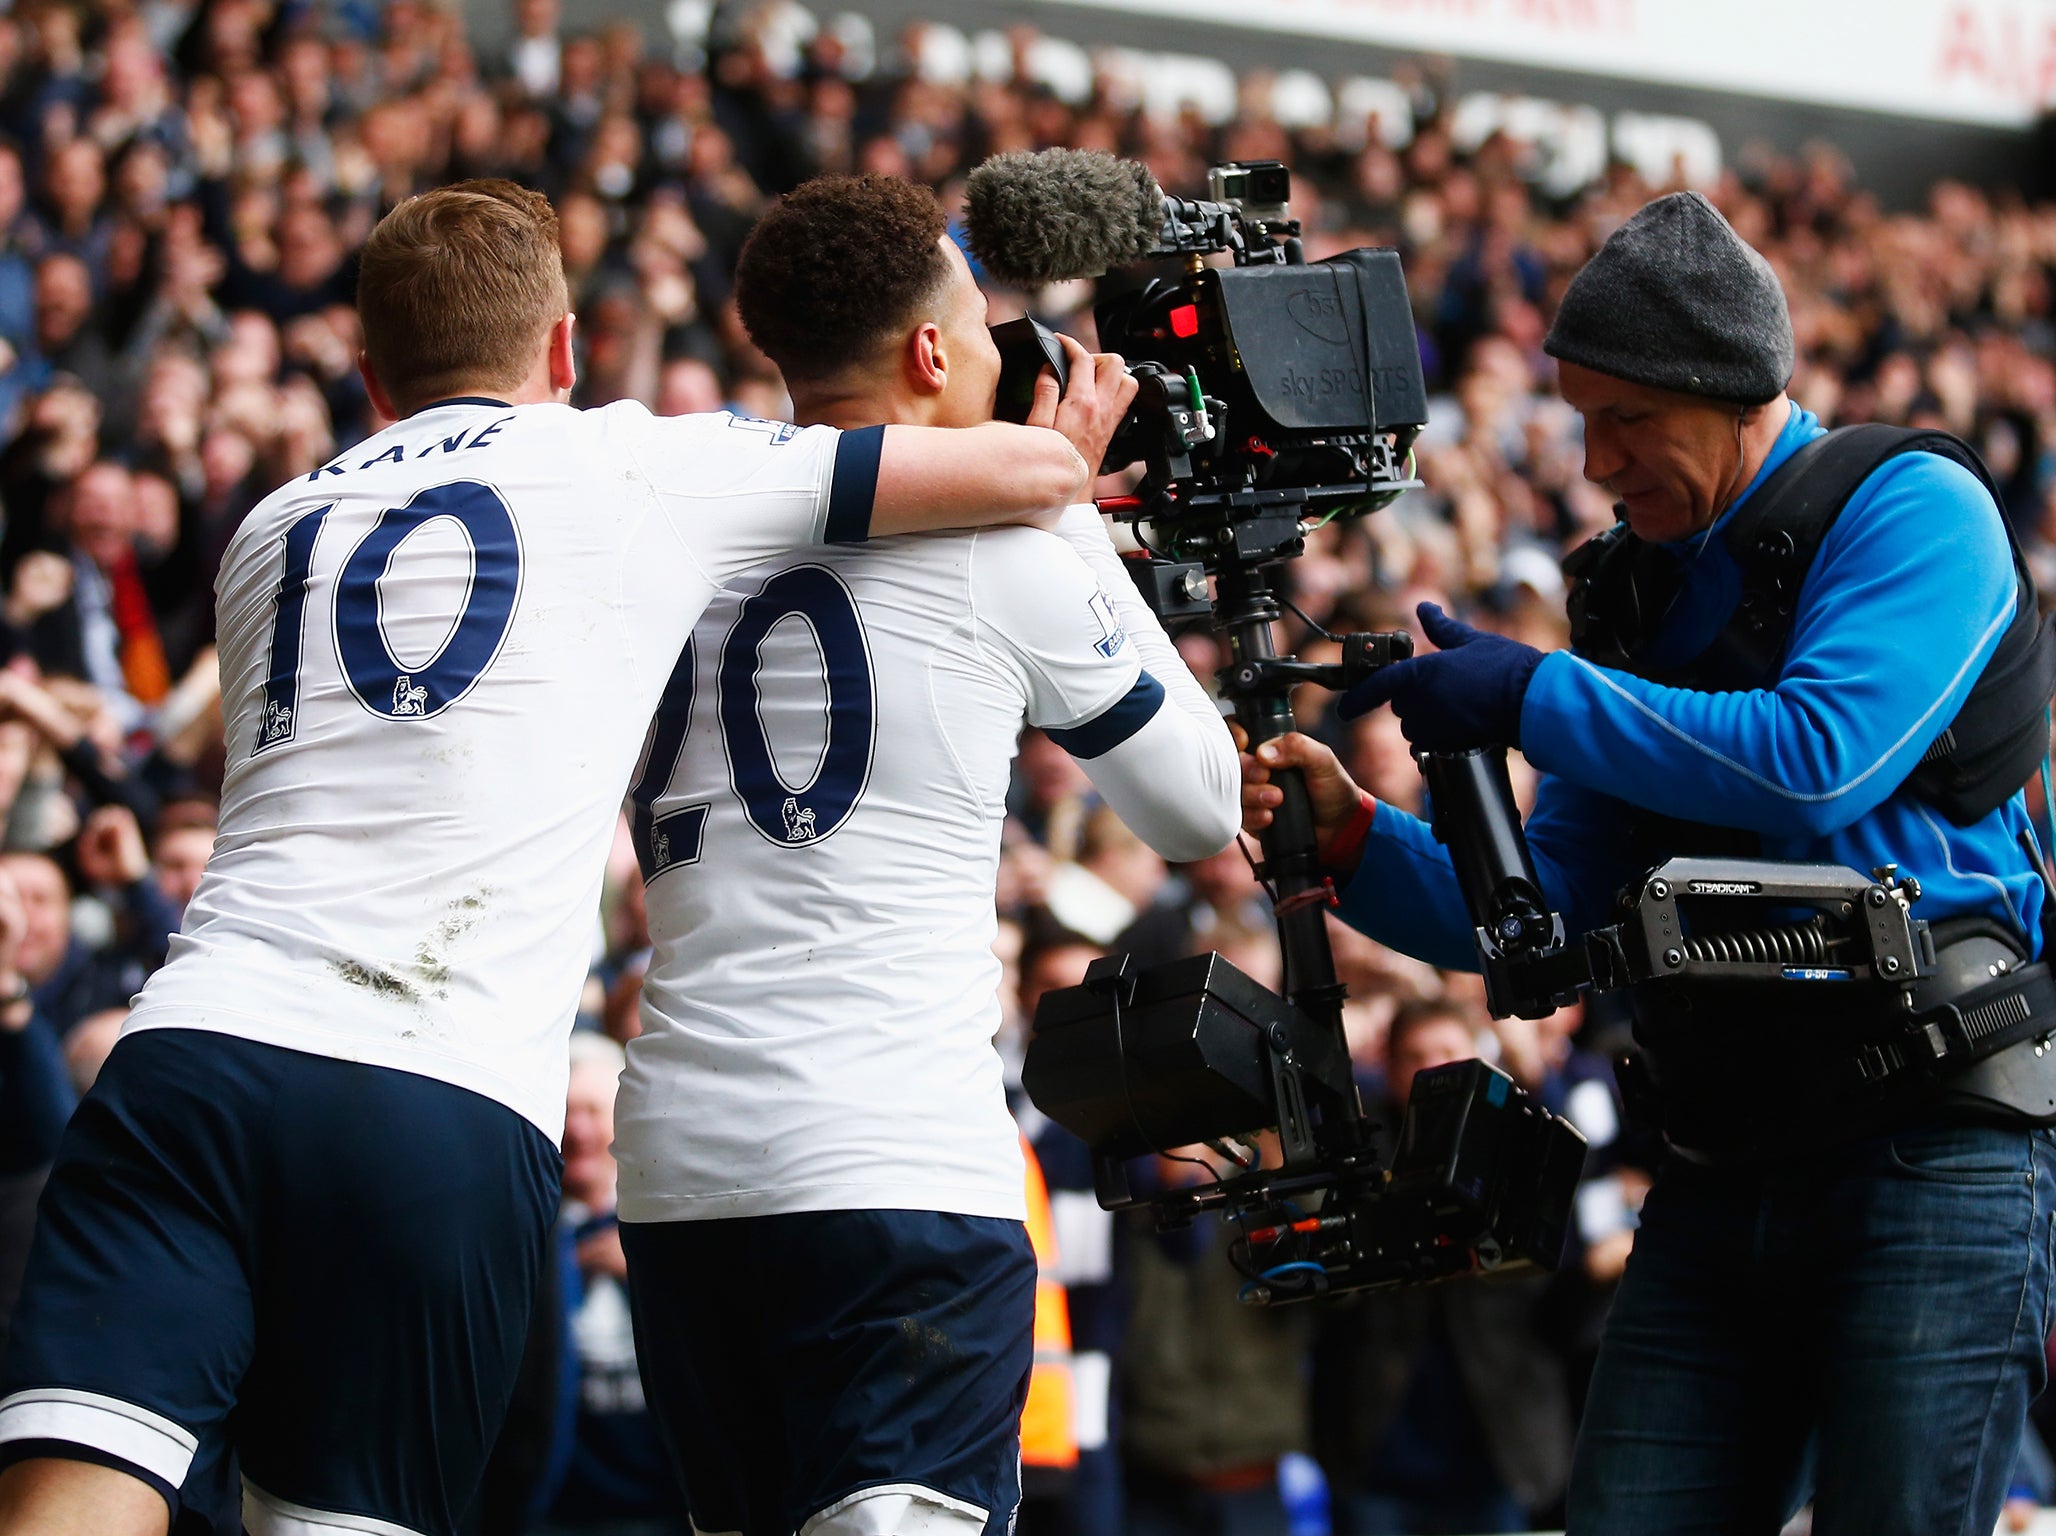 Facebook refuse to rule out a bid for Premier League broadcast rights